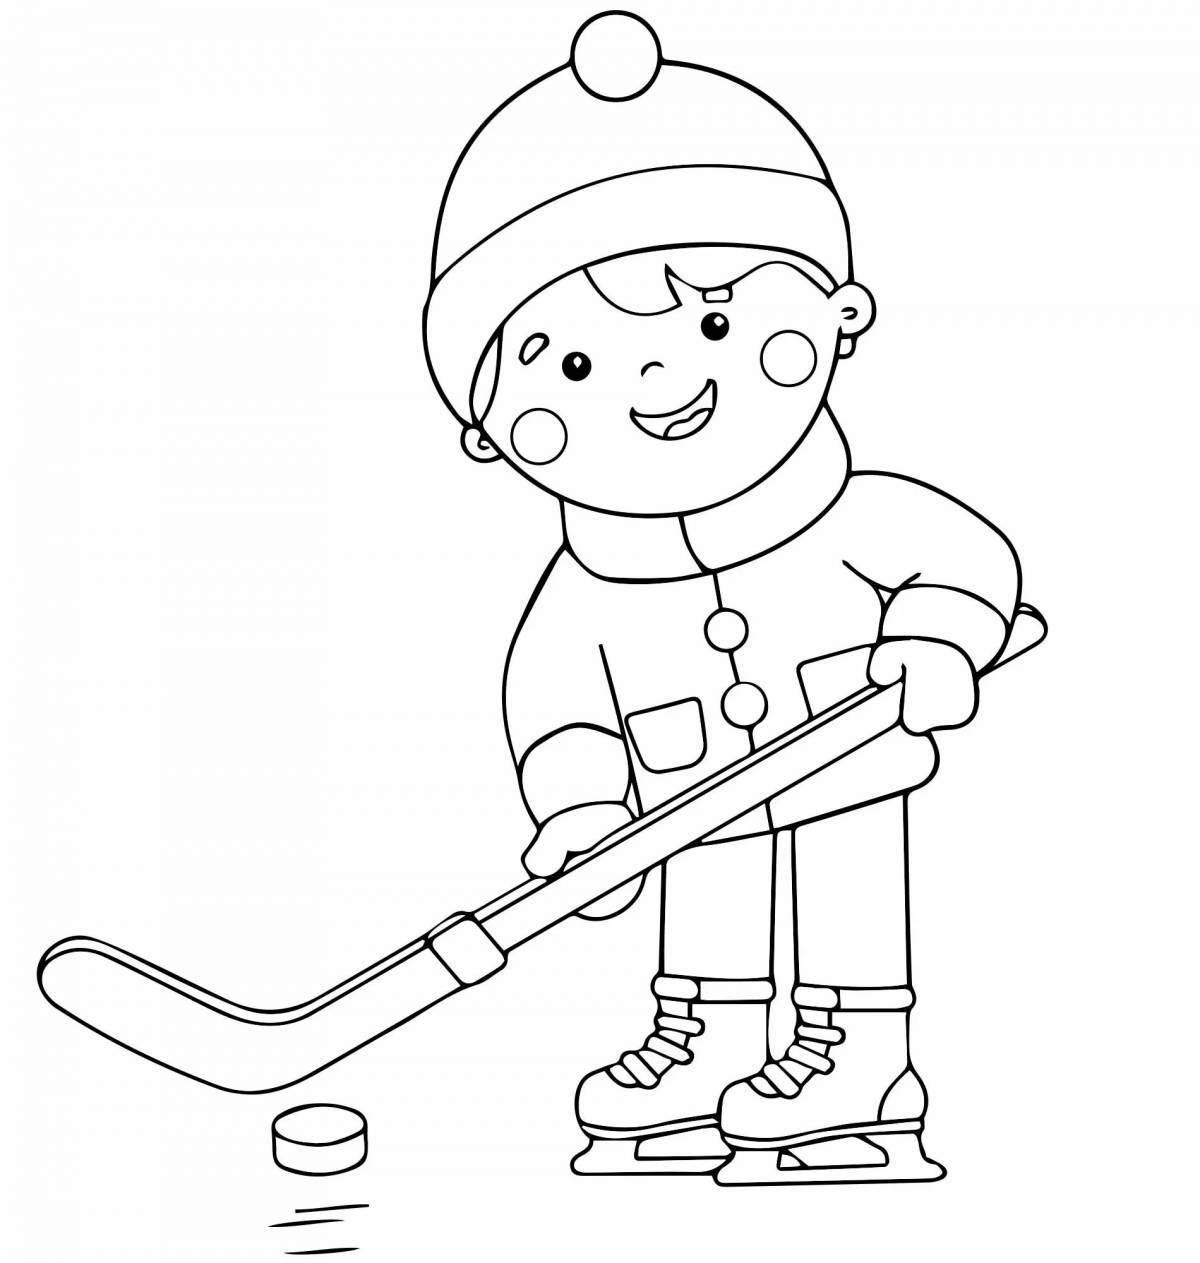 Whimsical coloring book winter sports for kindergarten